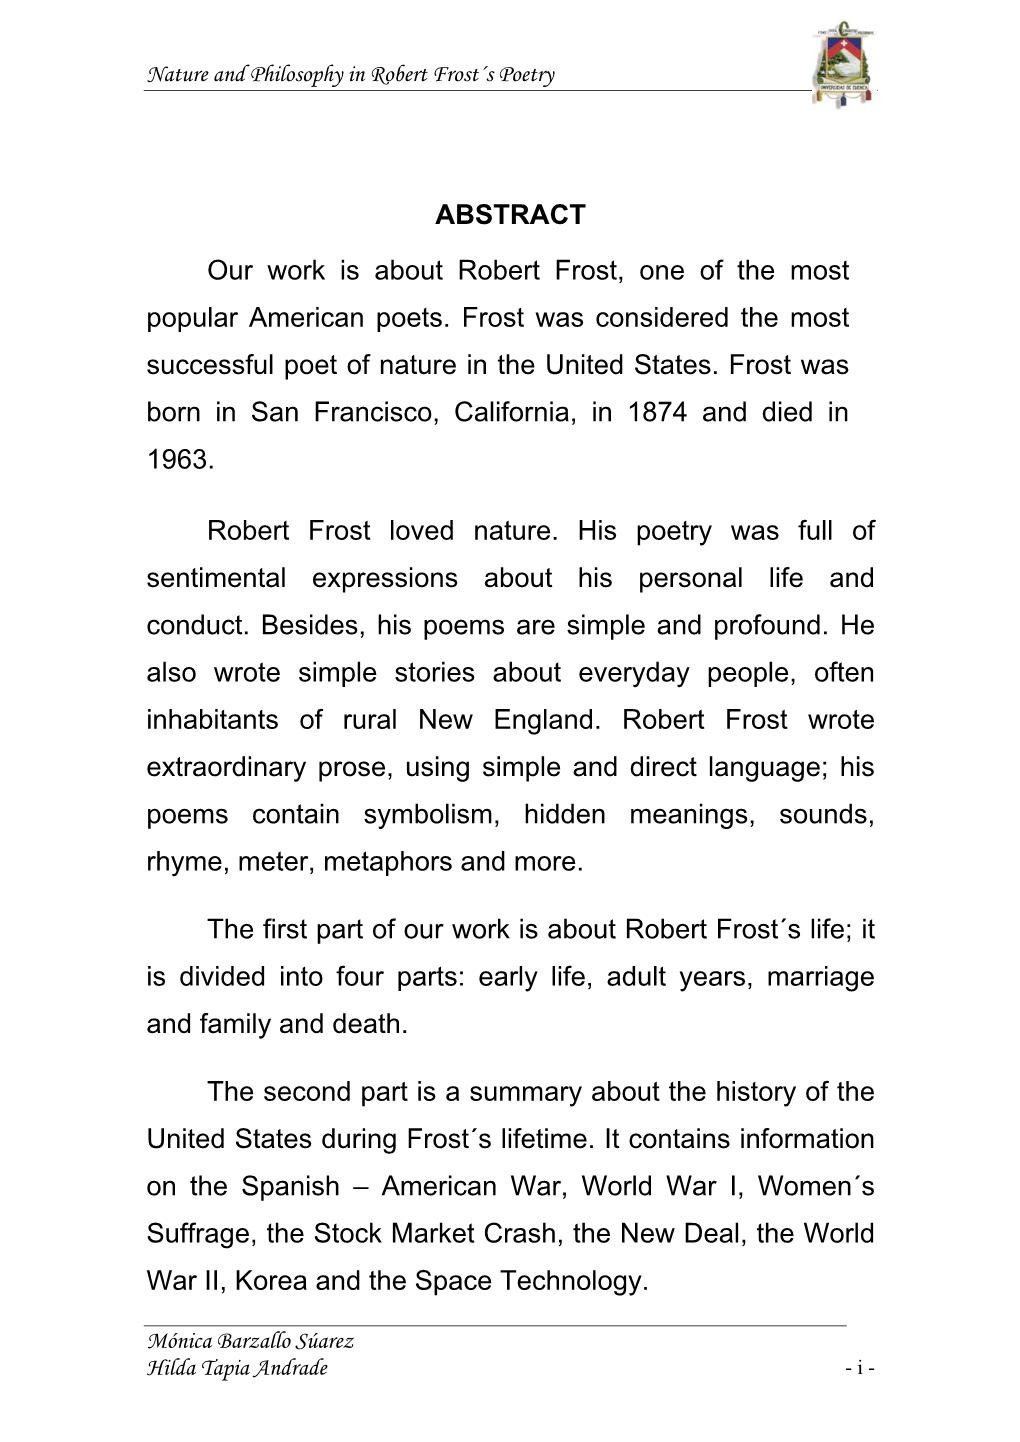 ABSTRACT Our Work Is About Robert Frost, One of the Most Popular